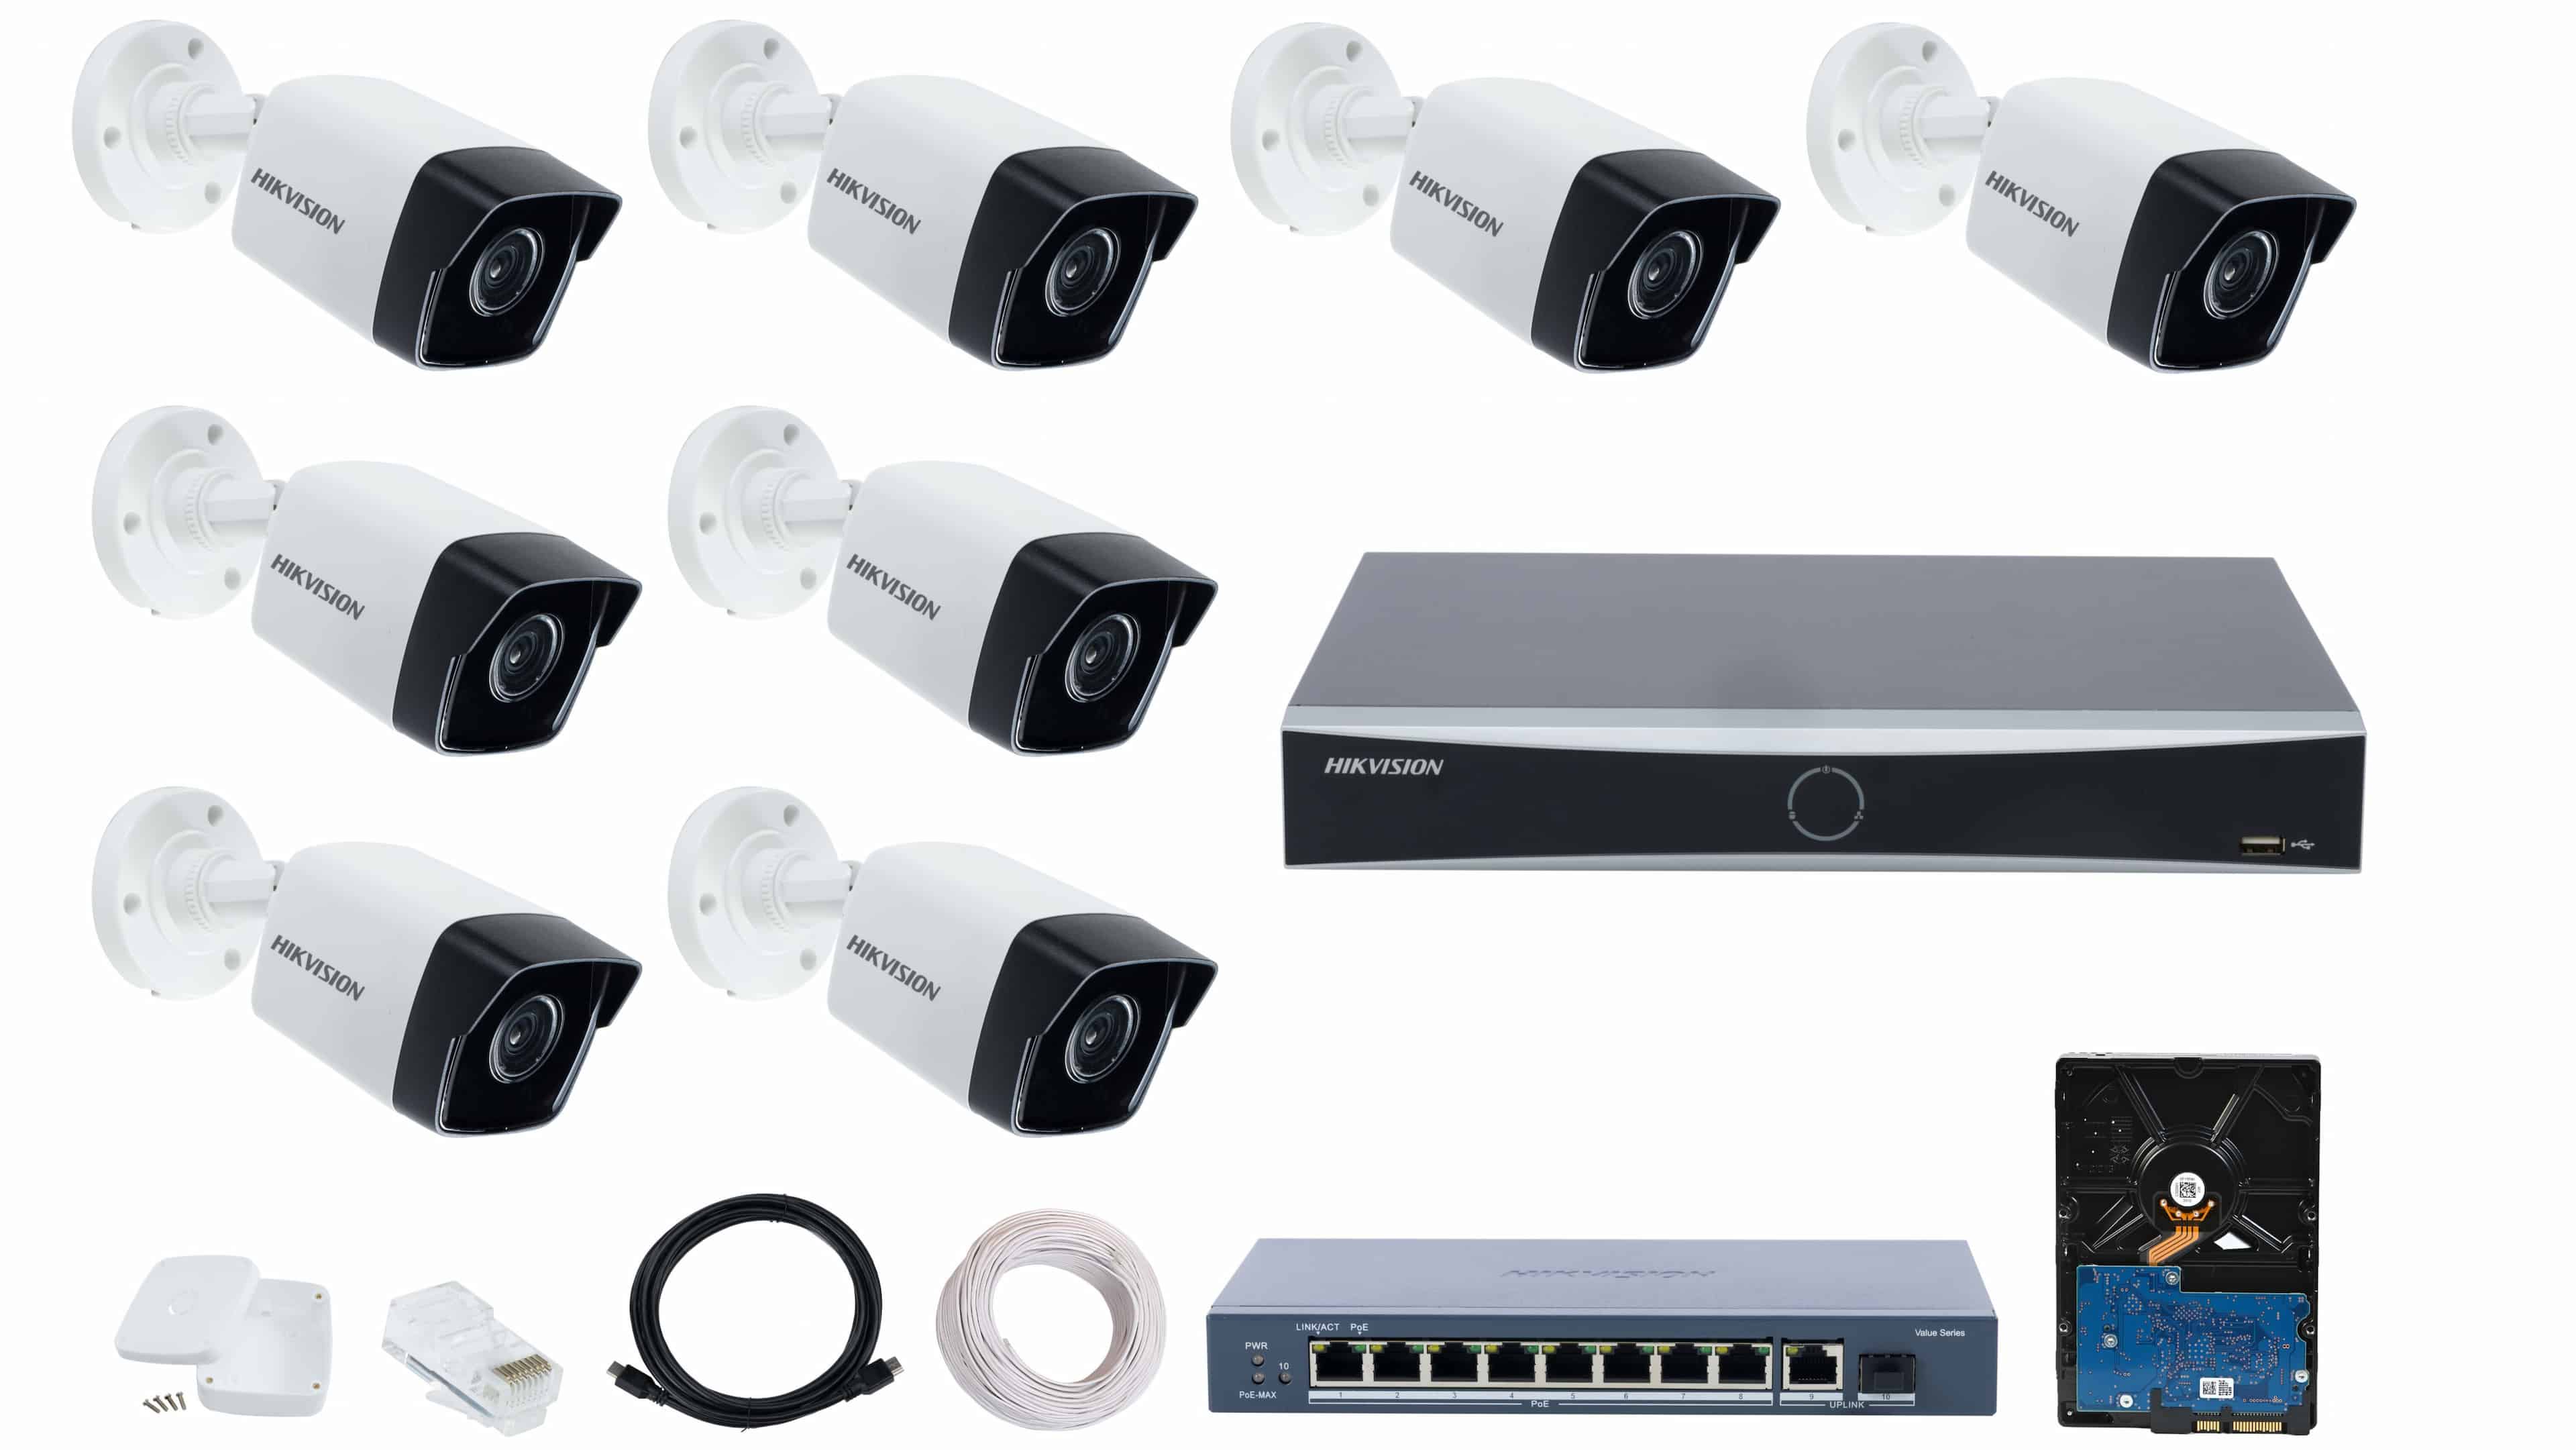 HIKVISION 8 CCTV IP Camera Full Set with 8 Channel 4K NVR, 8x 2MP Bullet IP Cameras, 8 Port PoE Switch, 1TB HDD, RJ45, Cobox, Cat6 90m & HDMI Cables